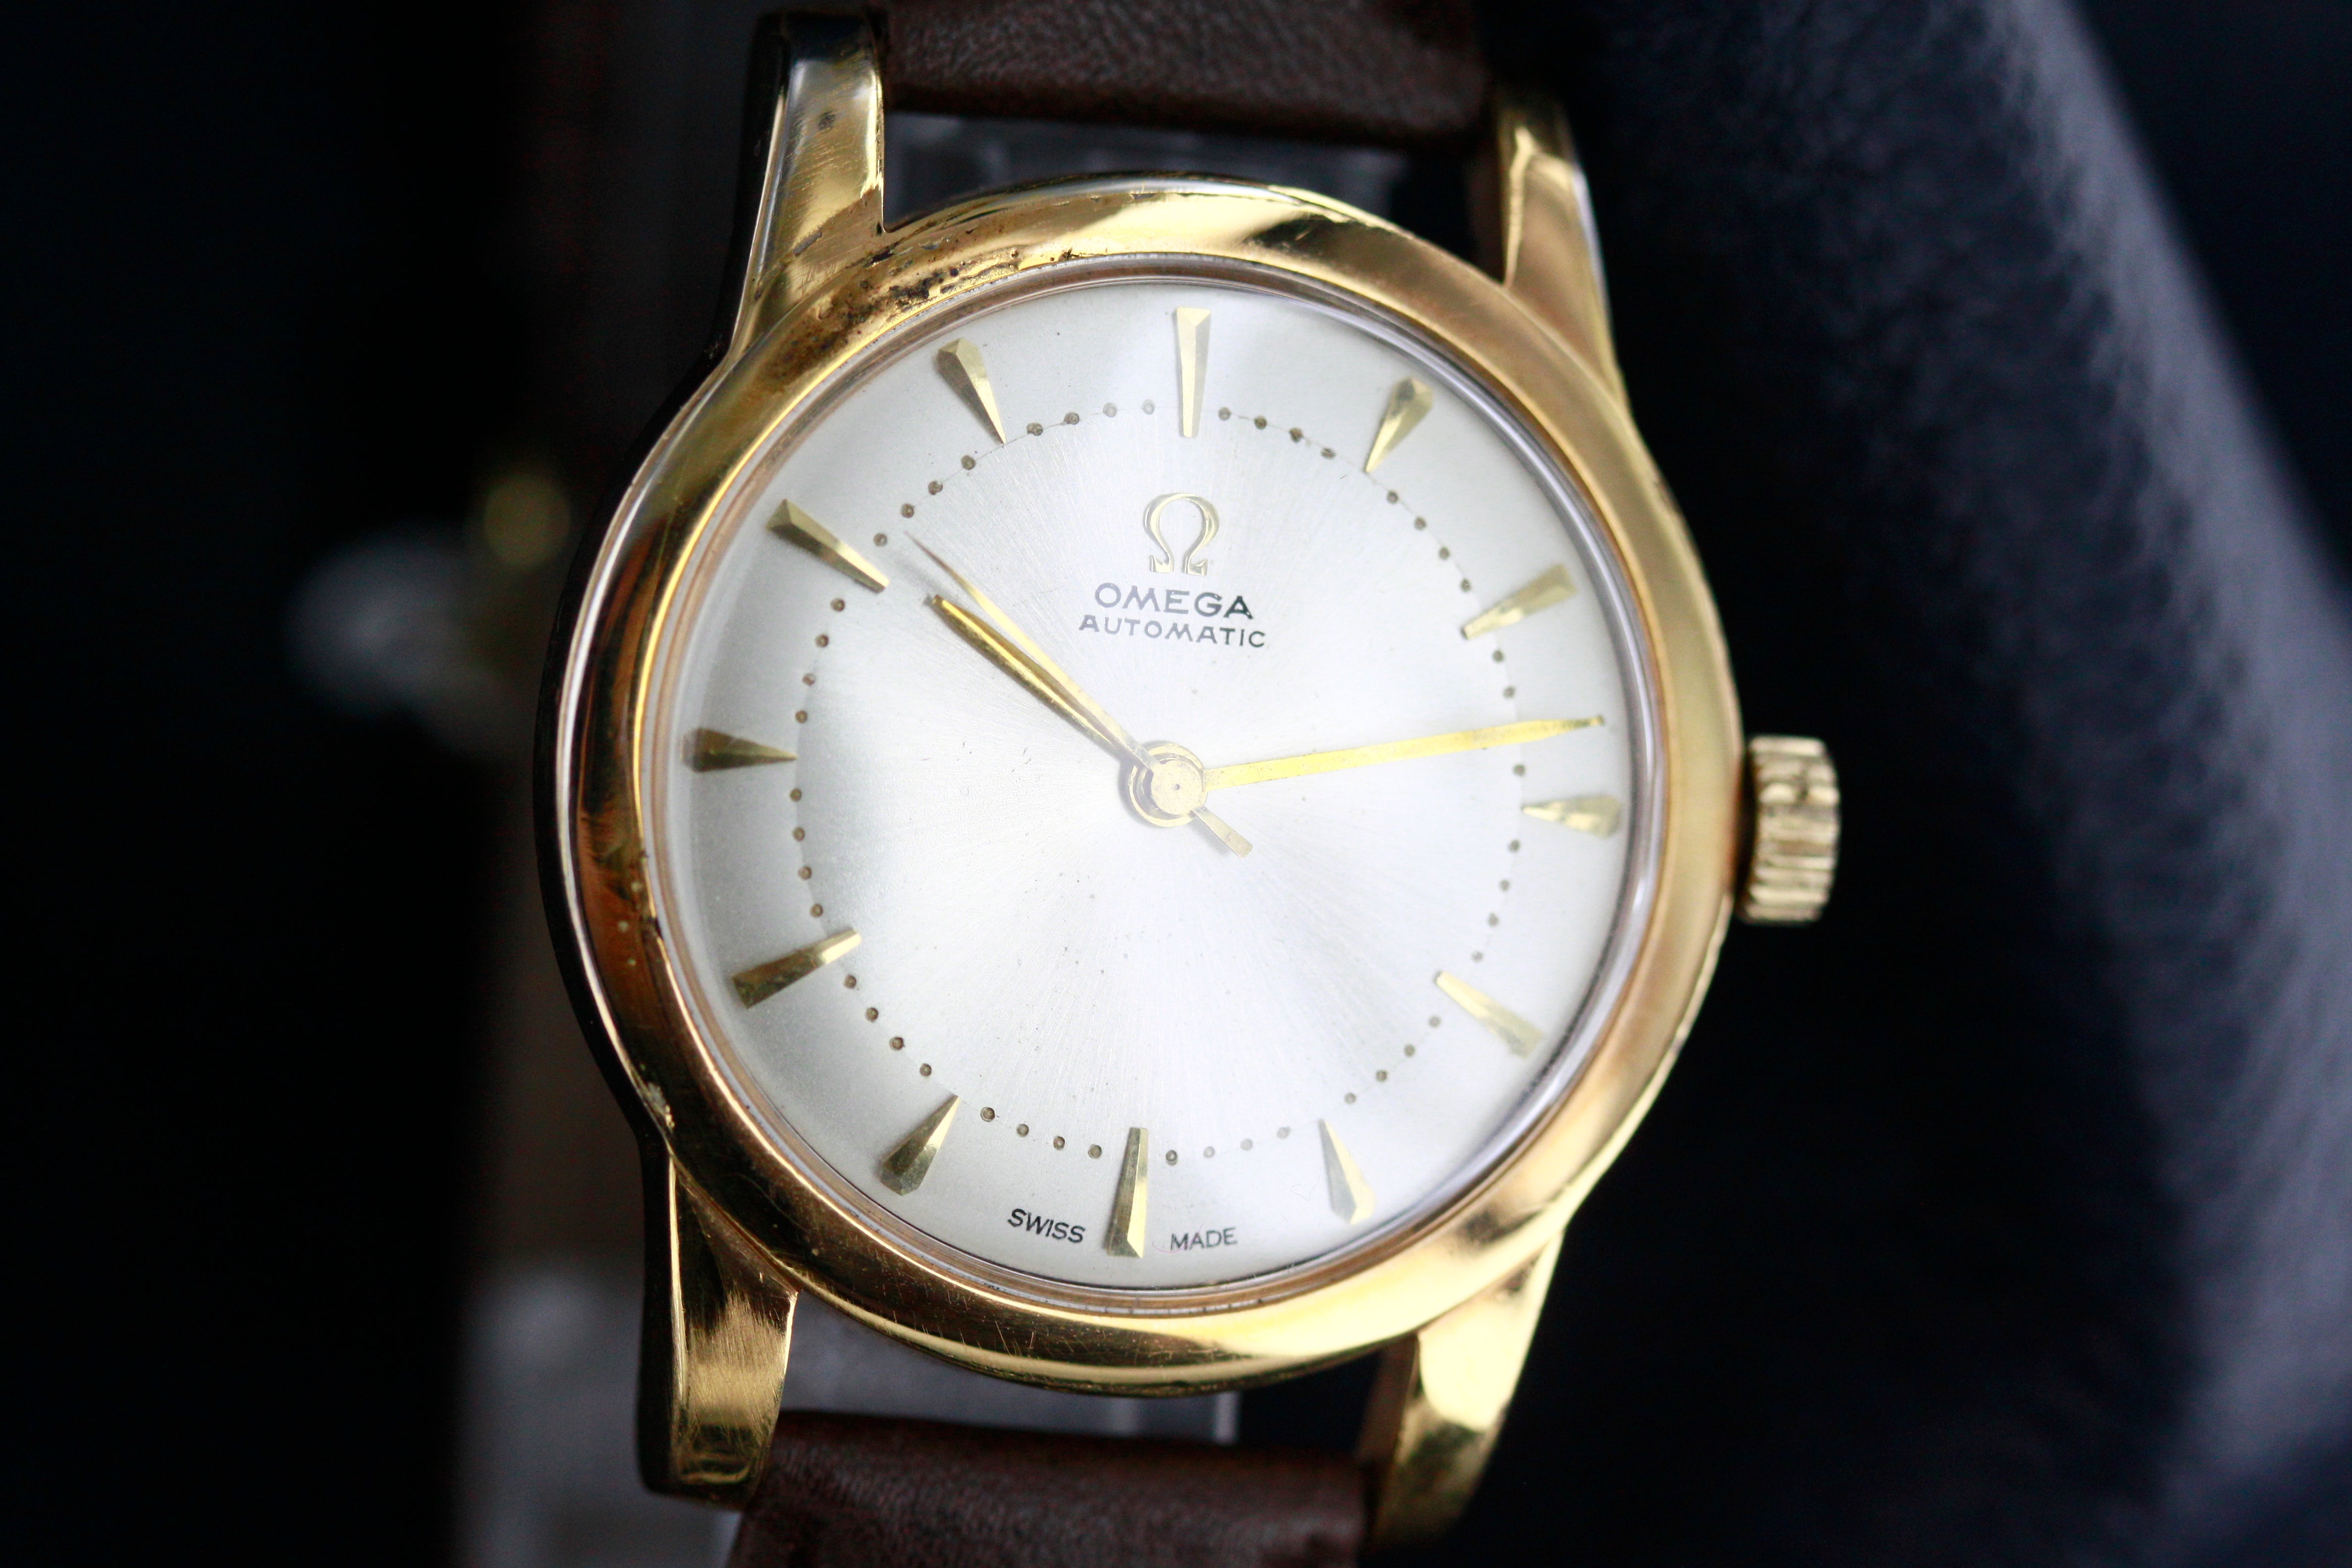 Omega Champagne dial from 1950. Hammer Automatic movement